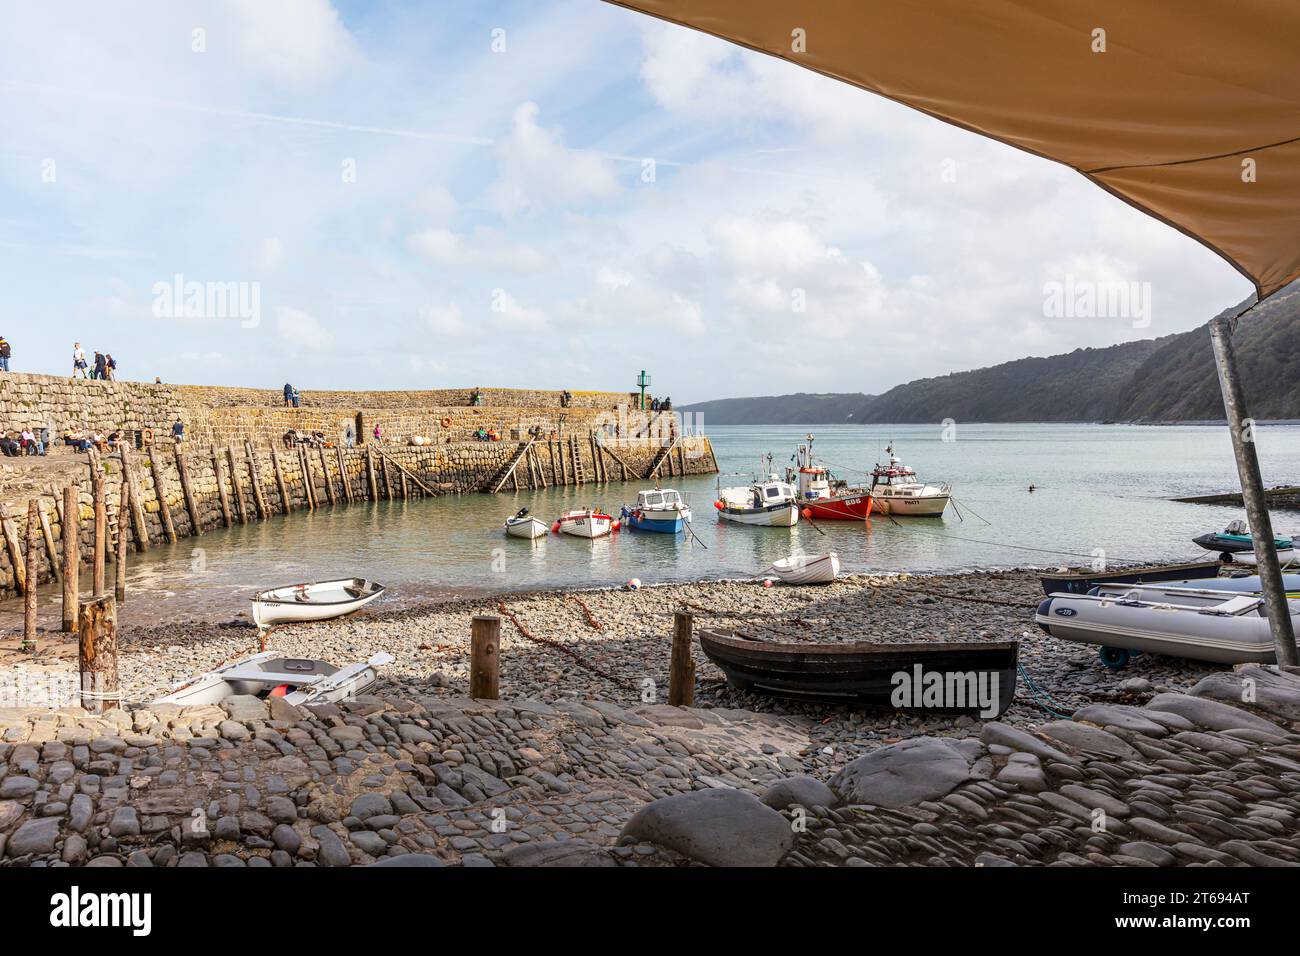 Clovelly, Devon, UK, England, Clovelly harbour, Clovelly UK, Clovelly England, Clovelly harbor, village, boats, fishing boats, pretty, villages, Stock Photo